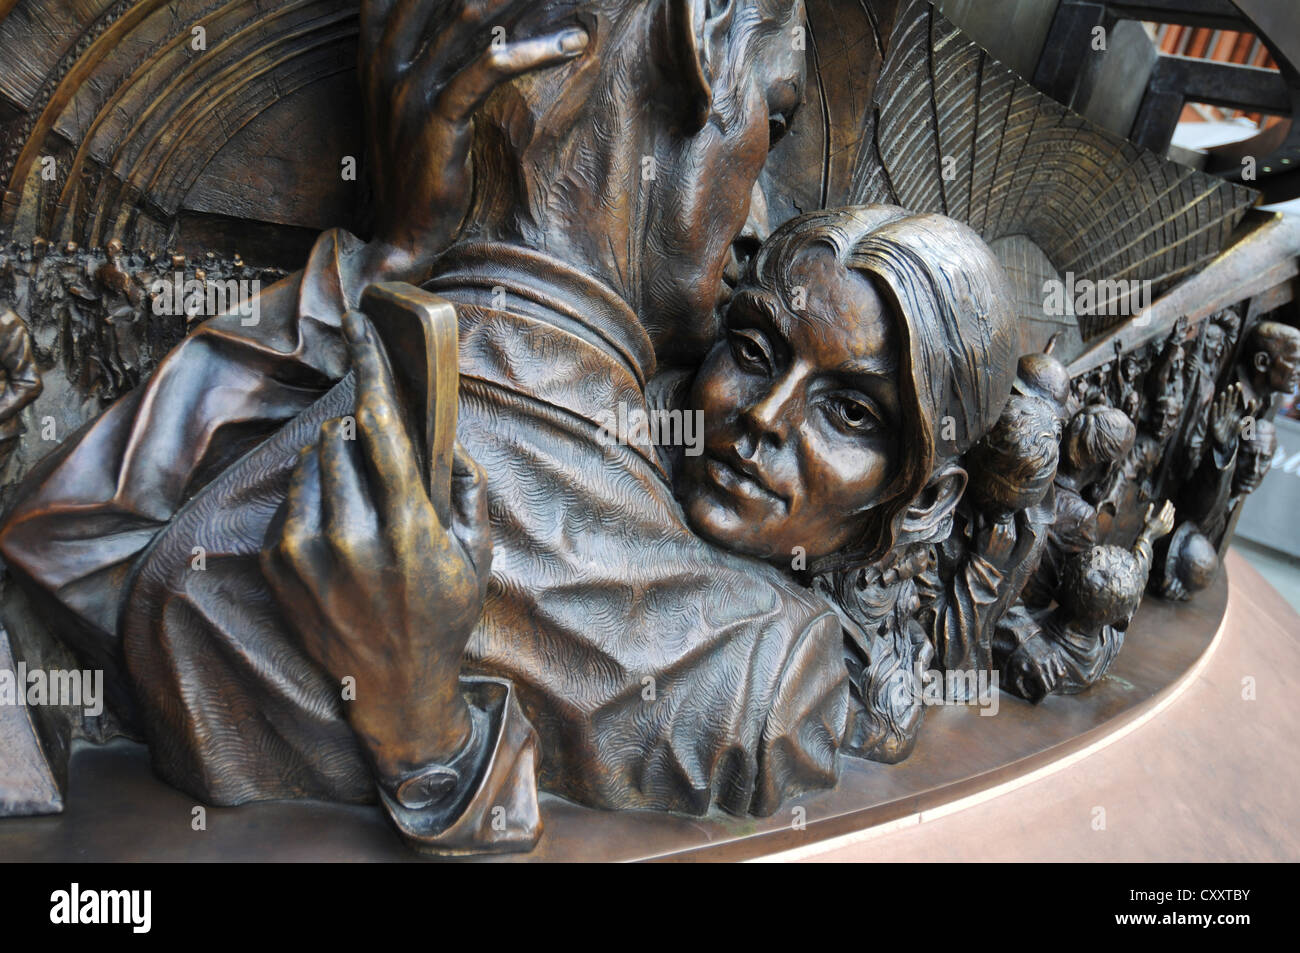 Sculpture of a woman reading a text over the shoulder of a man, St. Pancras Station, London, England, Britain, UK Stock Photo